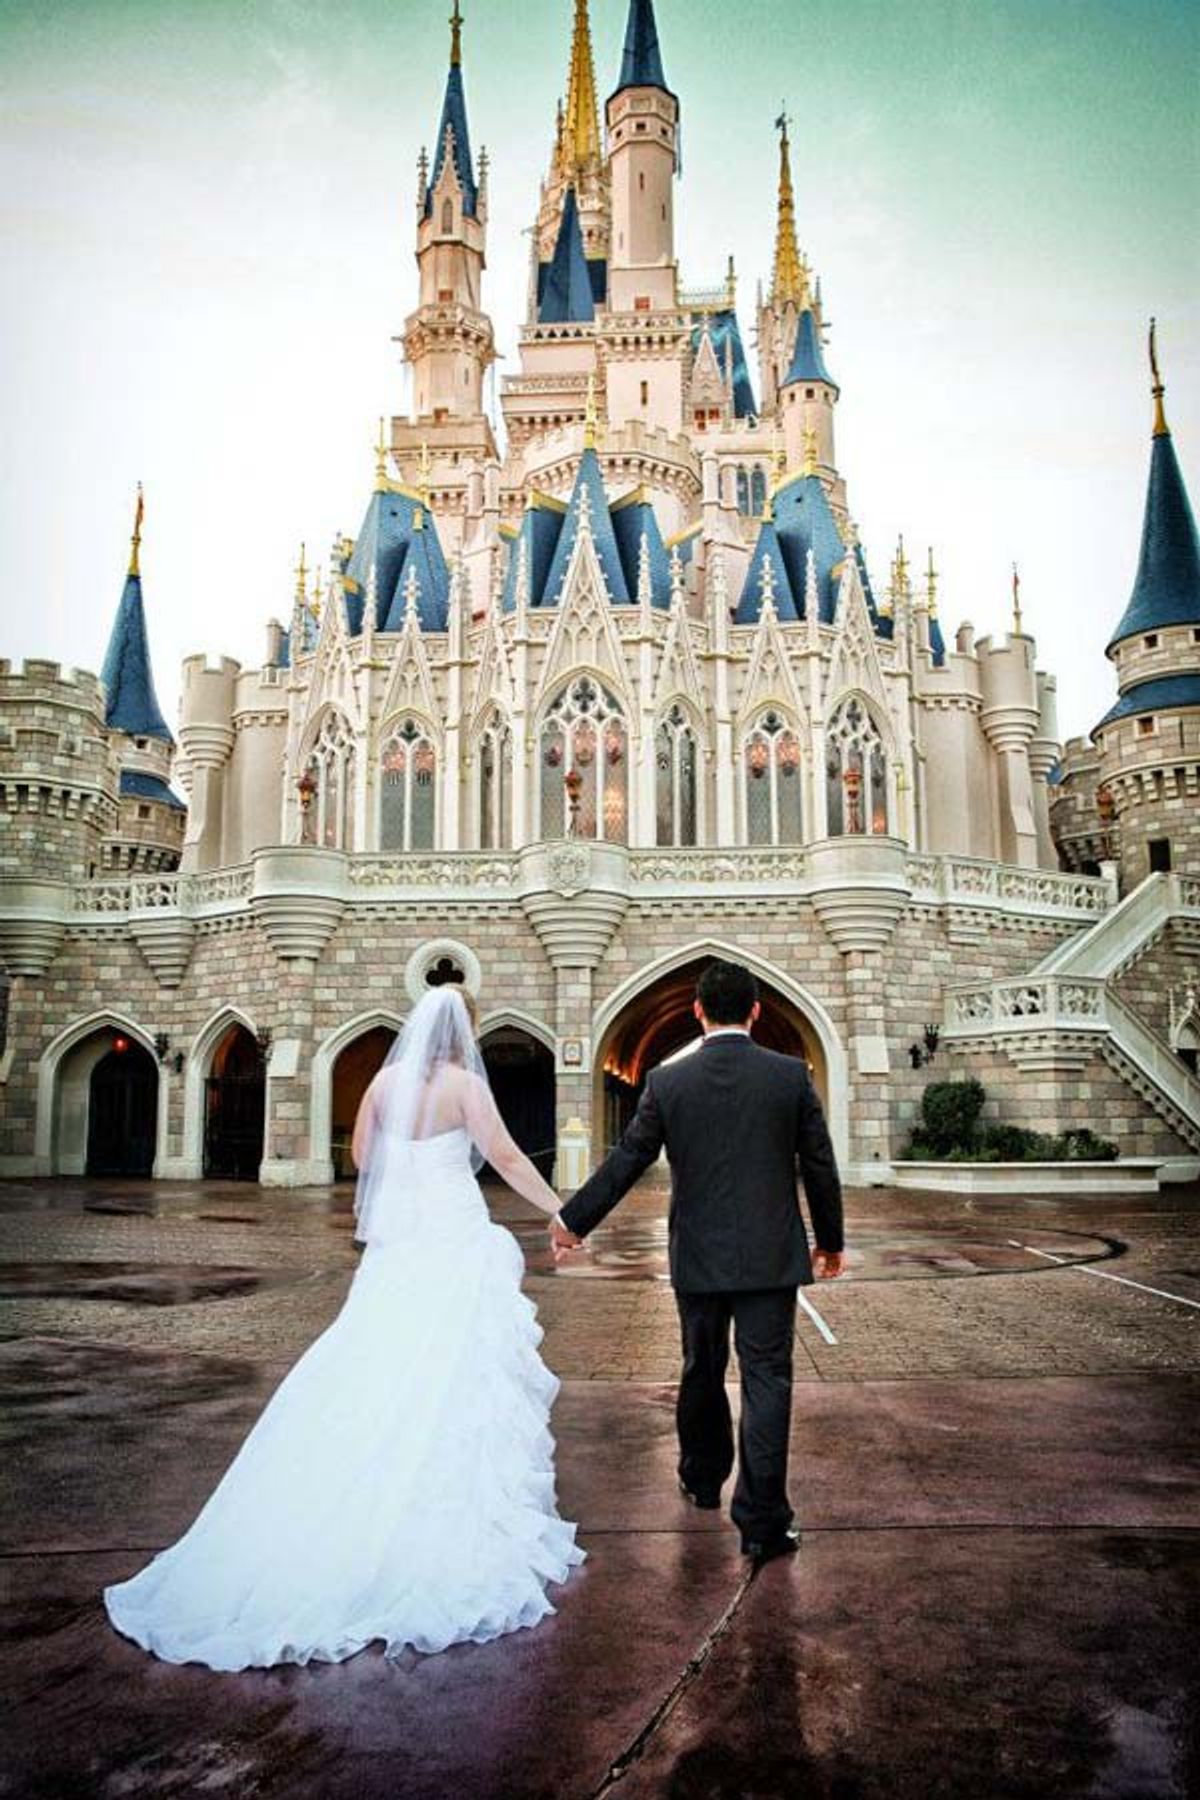 Five Reasons Why You Shouldn't Get Married At Disney World As Told By A College Student